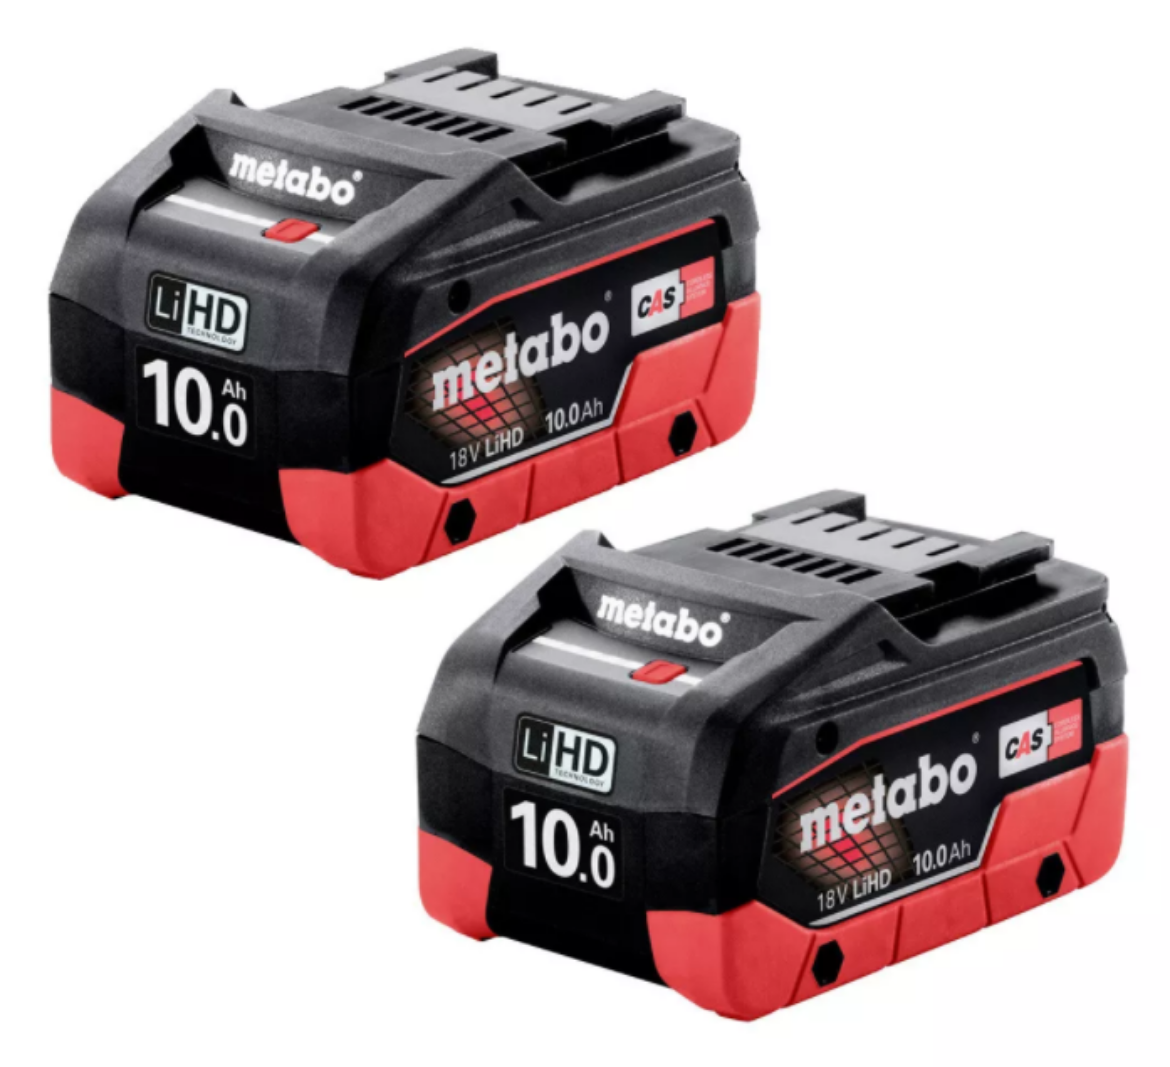 Picture of METABO 18V 10.0 AH LIHD TWIN BATTERY PACK